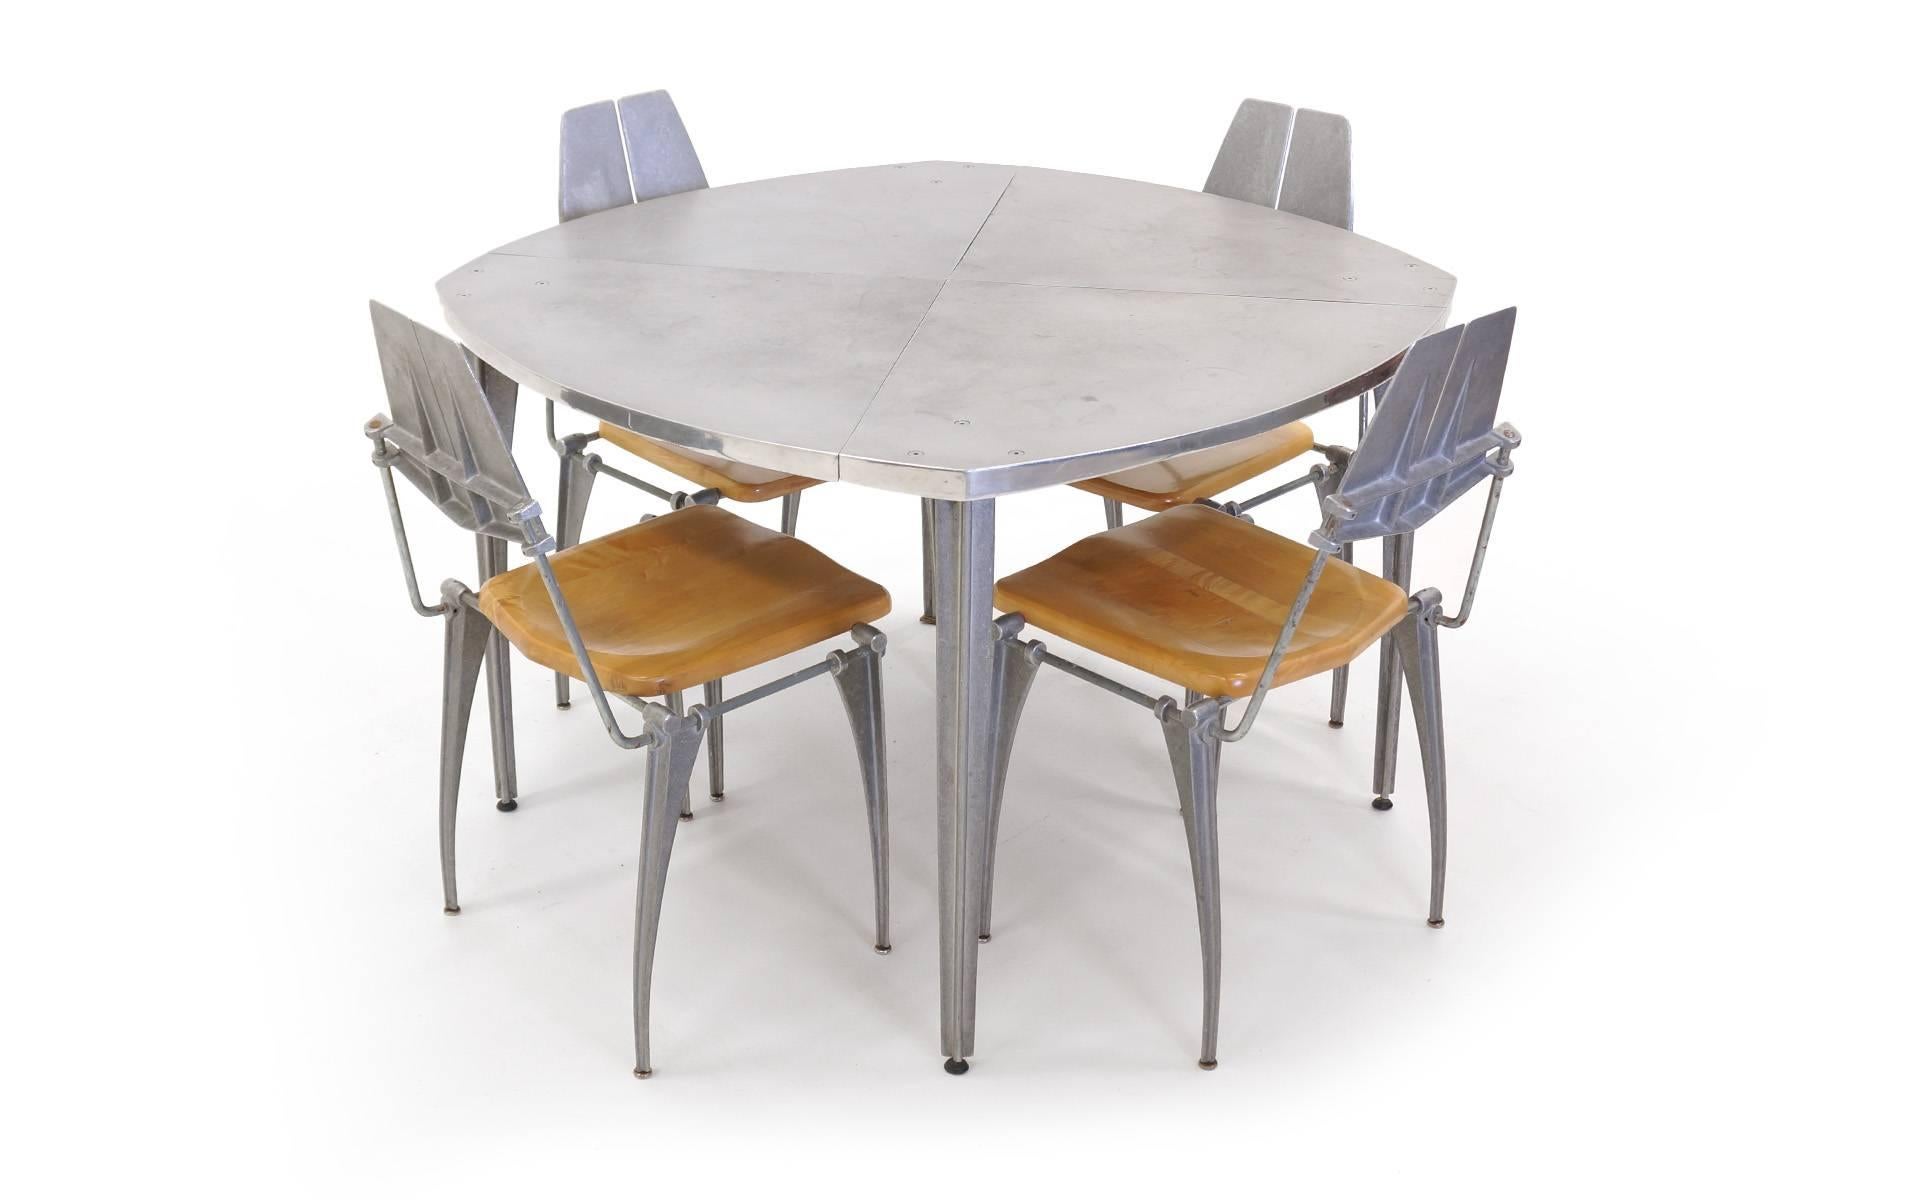 All original Robert Josten cast aluminum table and four chairs with cast aluminum frames and solid maple seats. The tabletop is the original cast aluminum in the form of a slightly rounded soft square, 1970s. Listing price is for the table and four